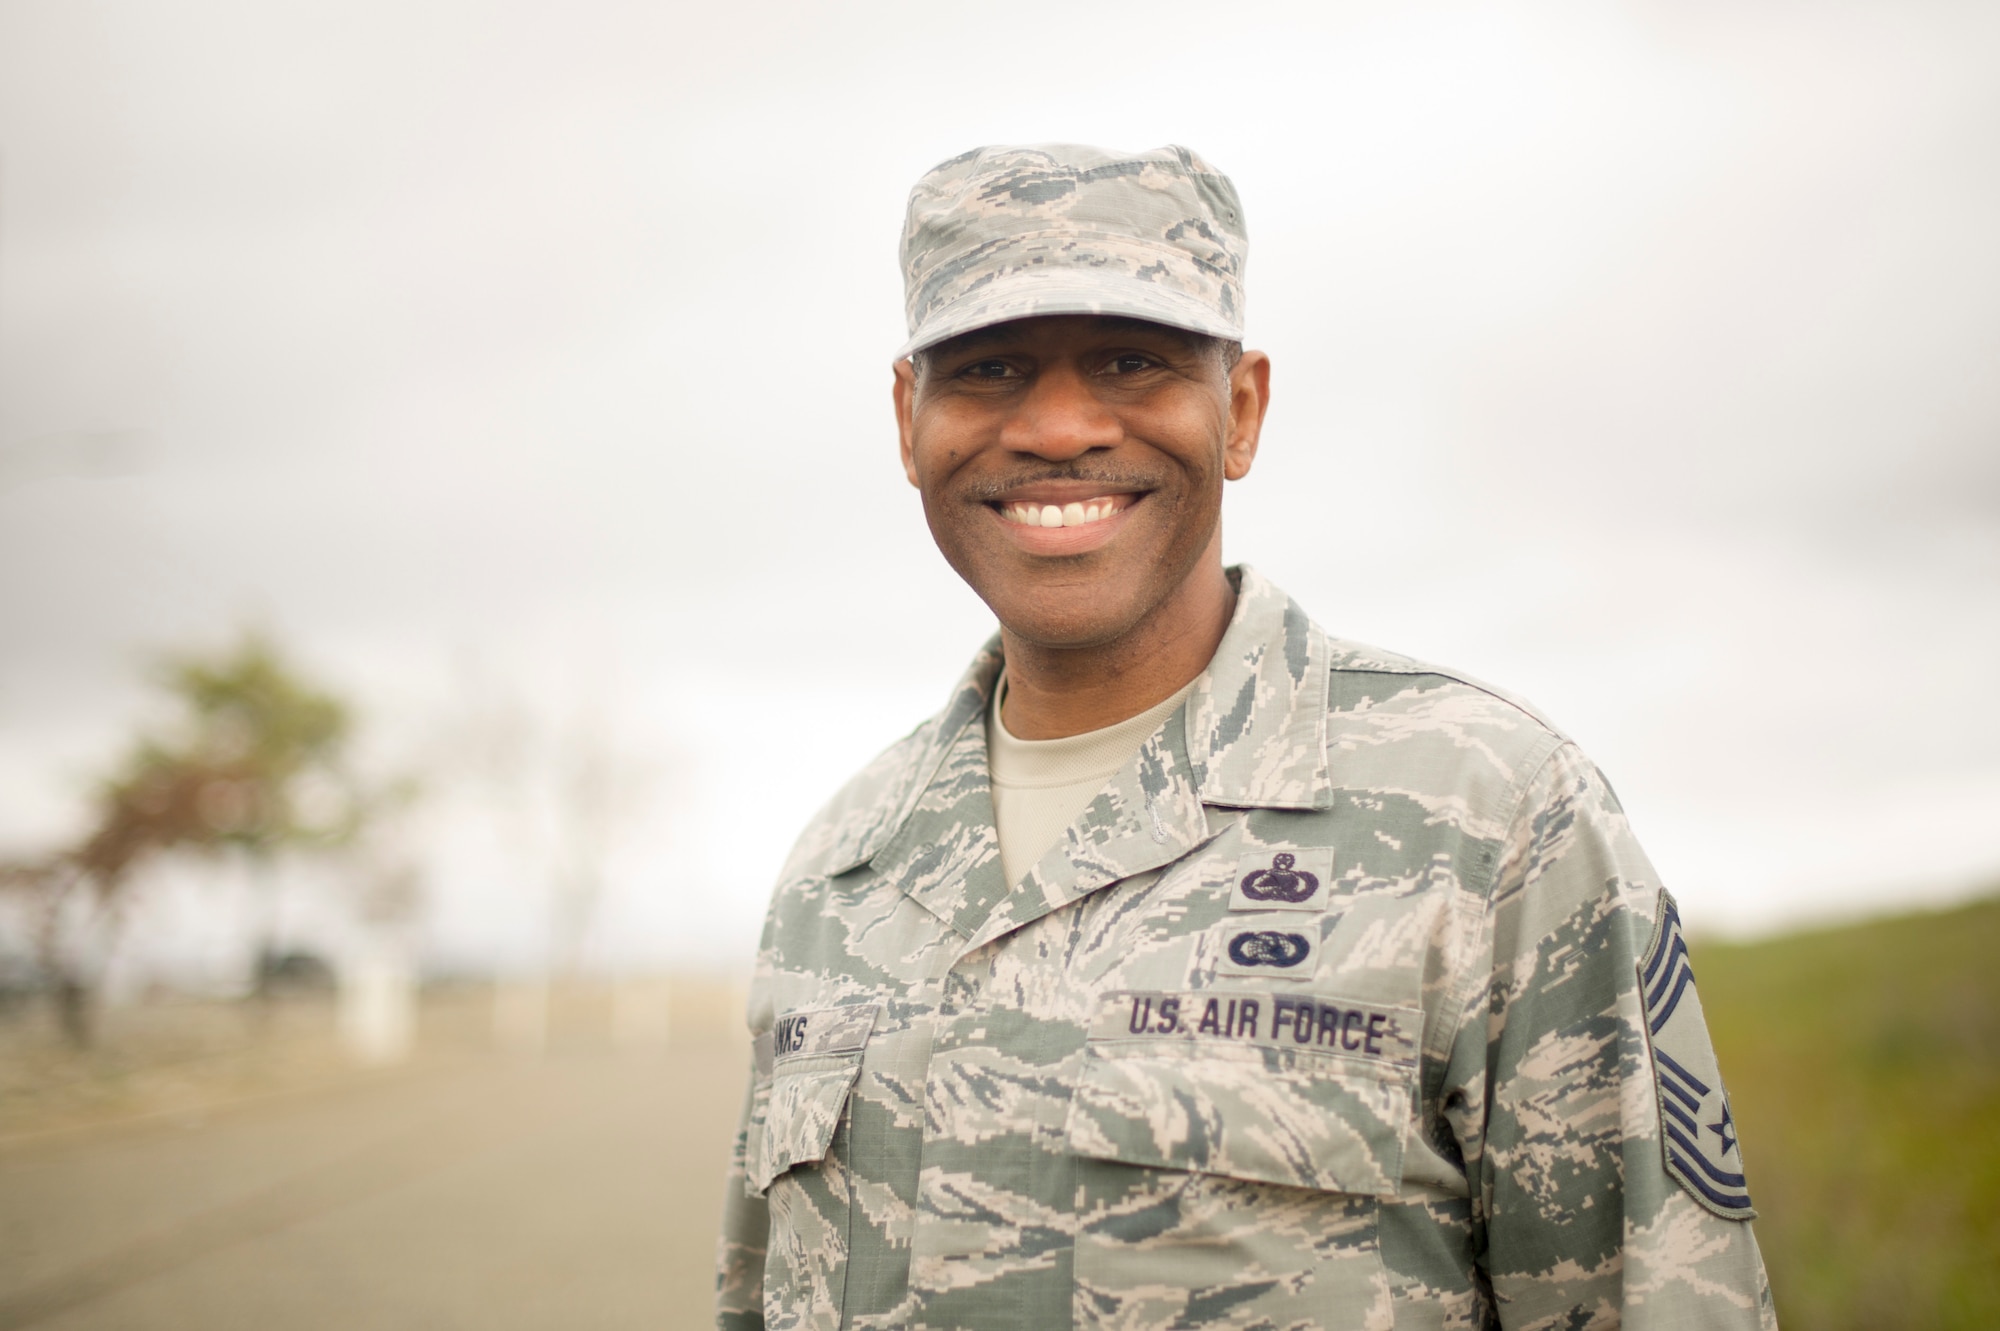 Chief Master Sgt. Martez D. Banks, 940th Operations Group superintendent, stands outside for a photo Feb. 26, at Beale Air Force Base, California.